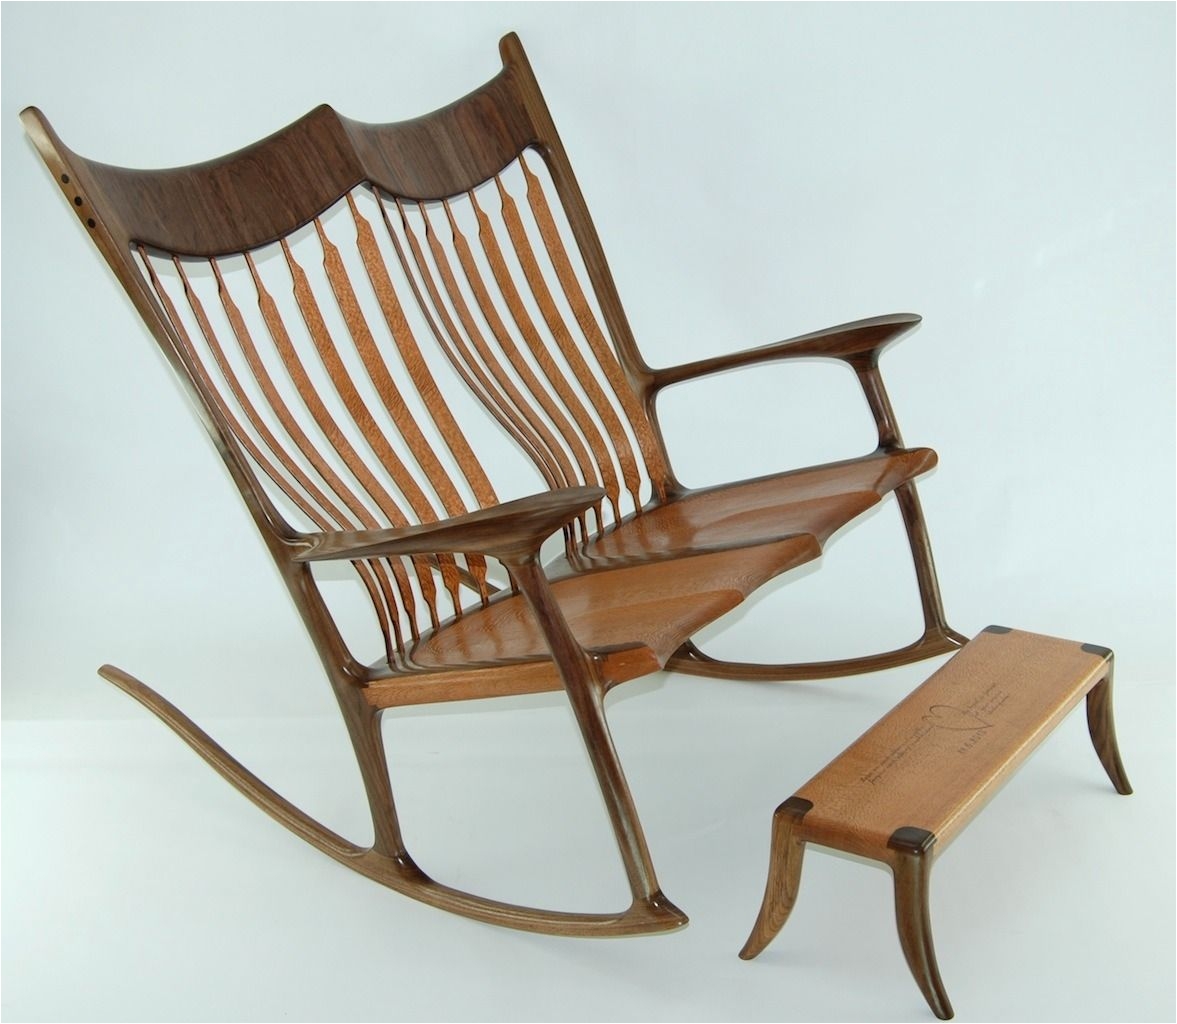 Timber Ridge Chairs Canada Canadian Woodworks Custom Double Wooden Rocking Chair Walnut